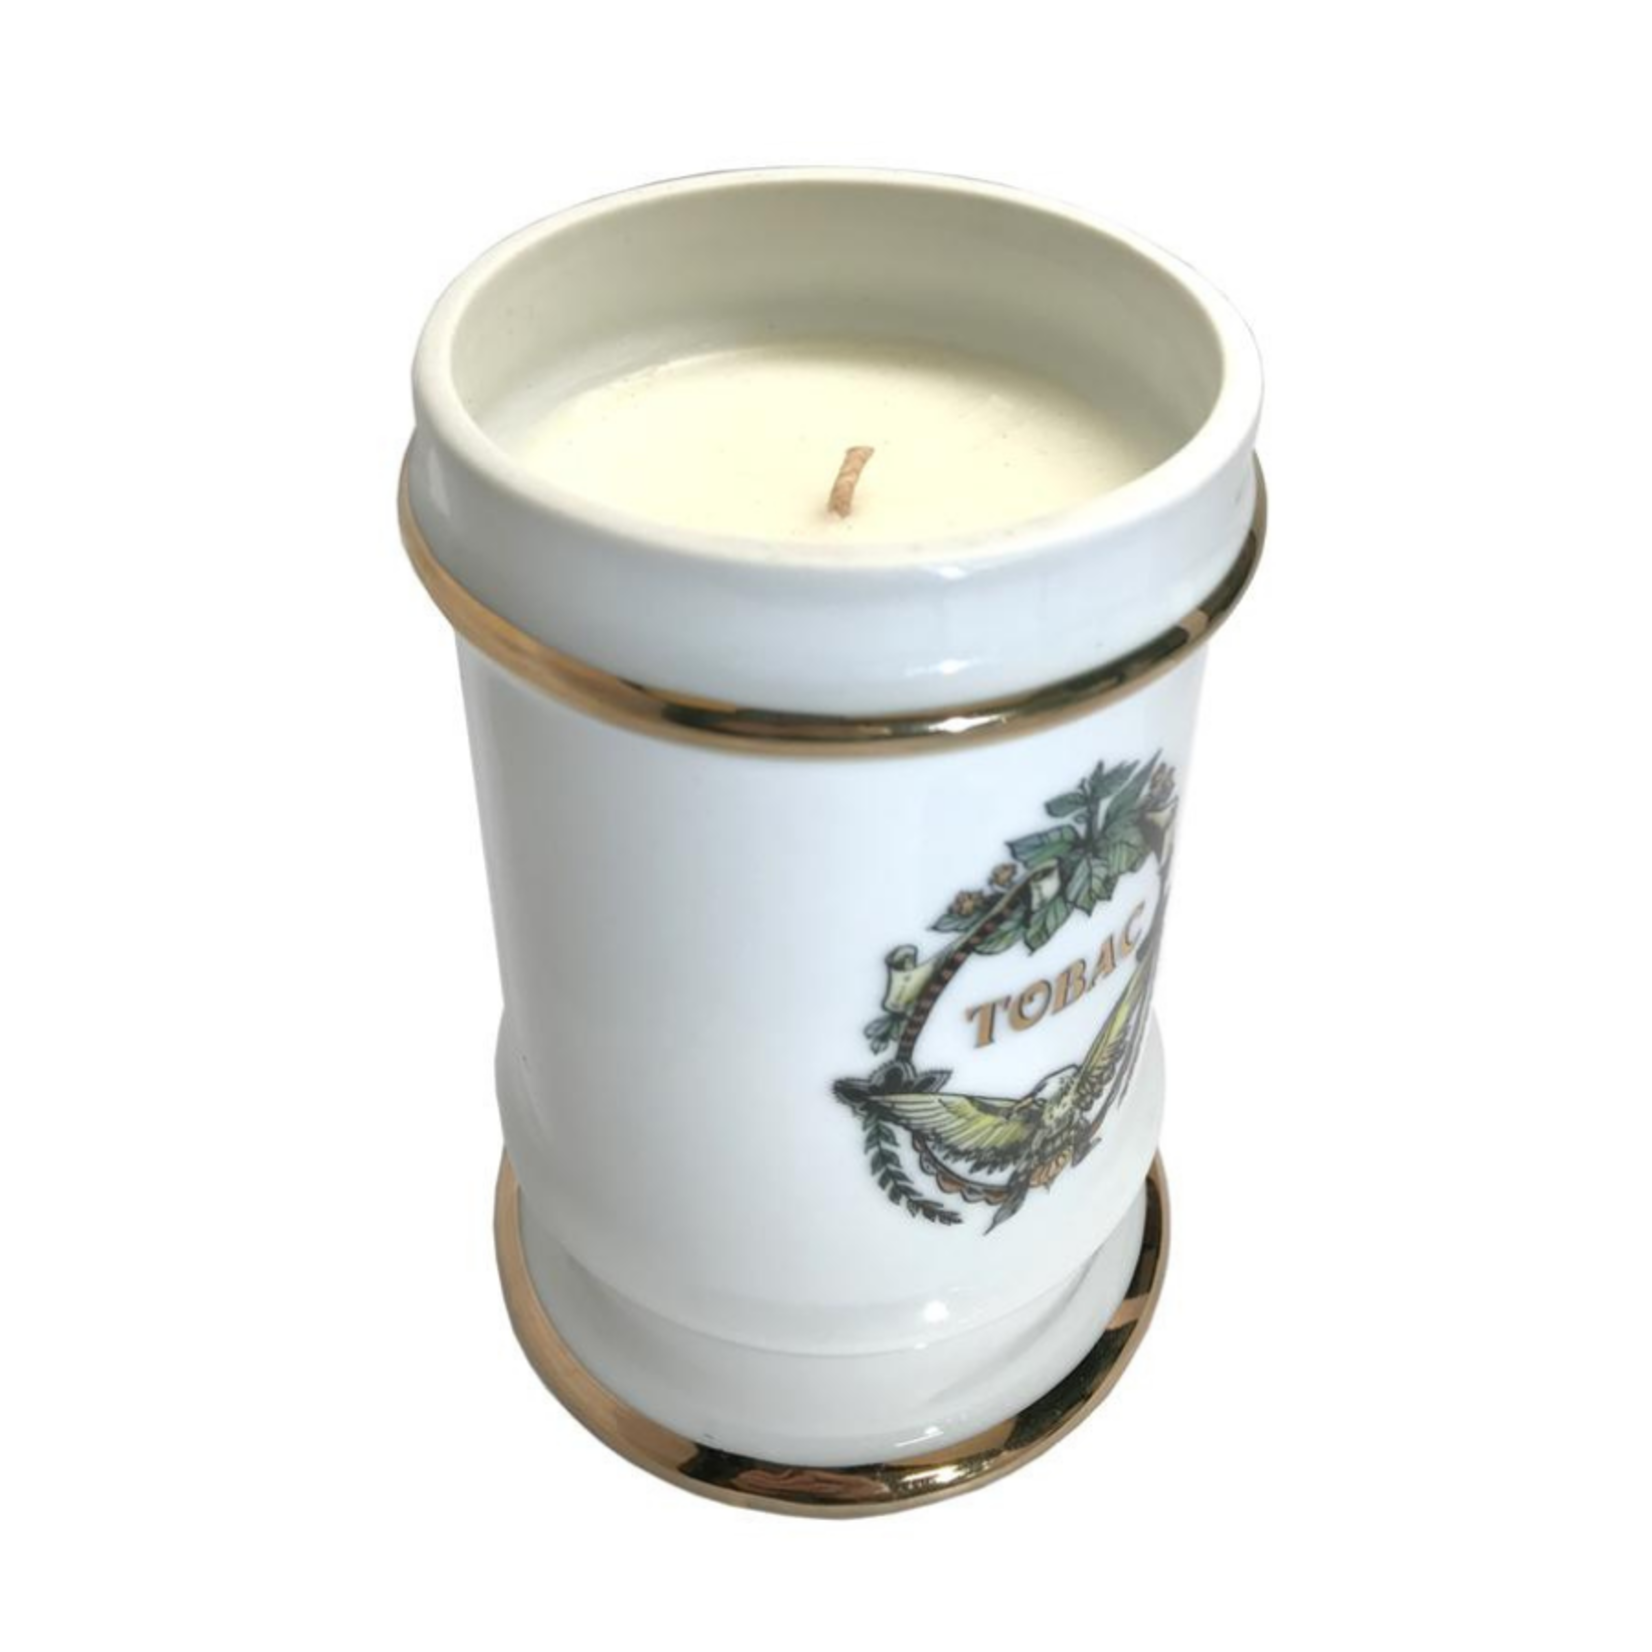 Spitfire Girl Apothecary Candle